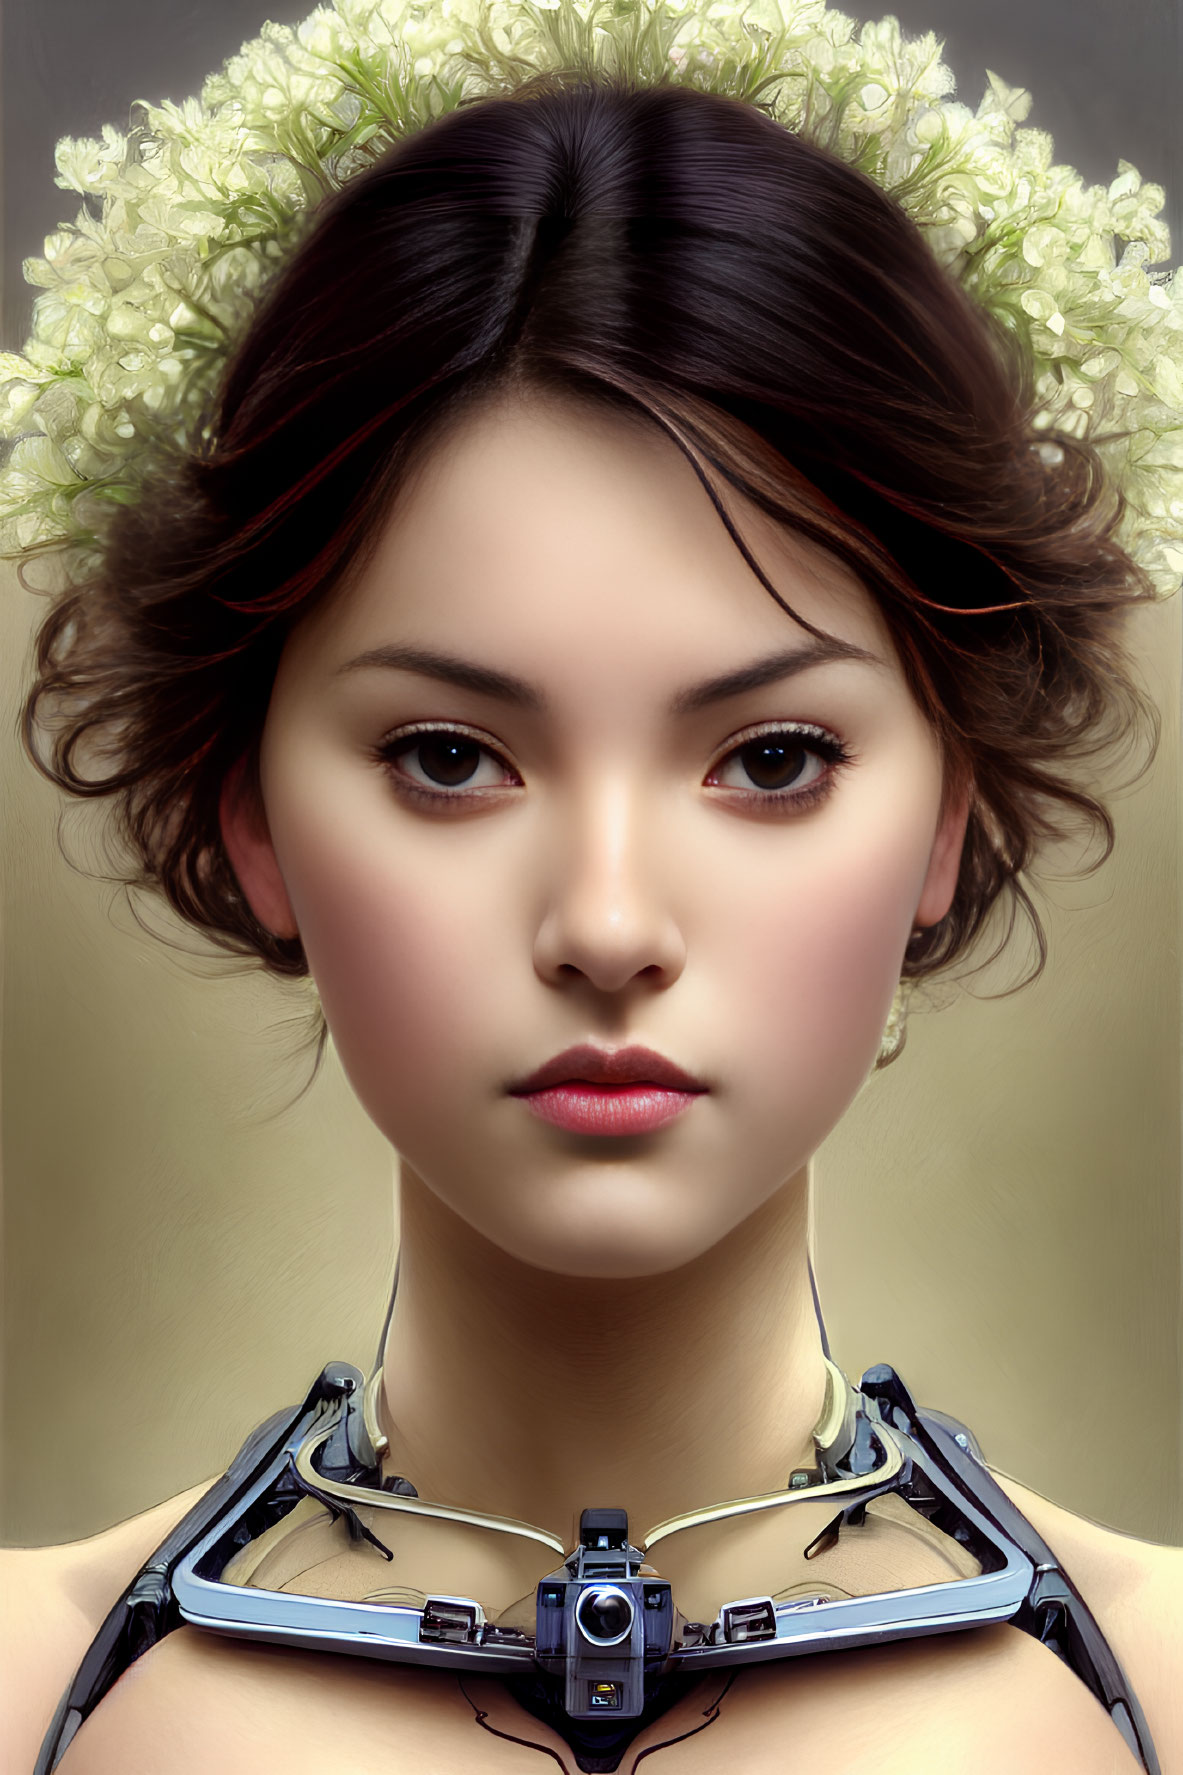 Digital artwork featuring female with robotic neck and white flower crown